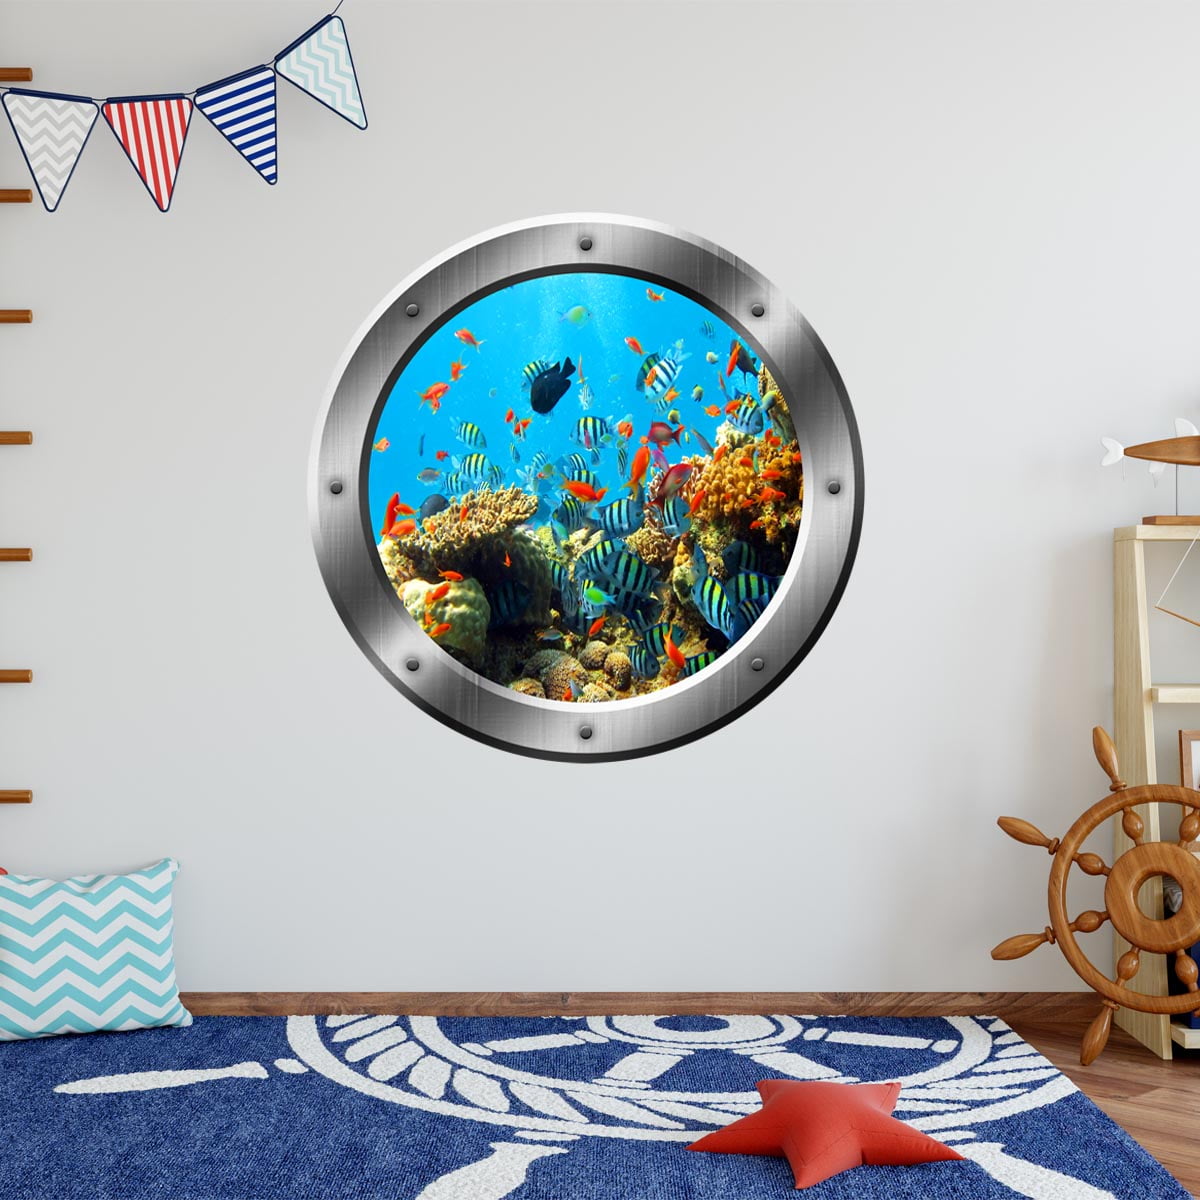 Dolphin Porthole Decal Removable Wall Sticker Decor Art Color Sea Animals Fish 